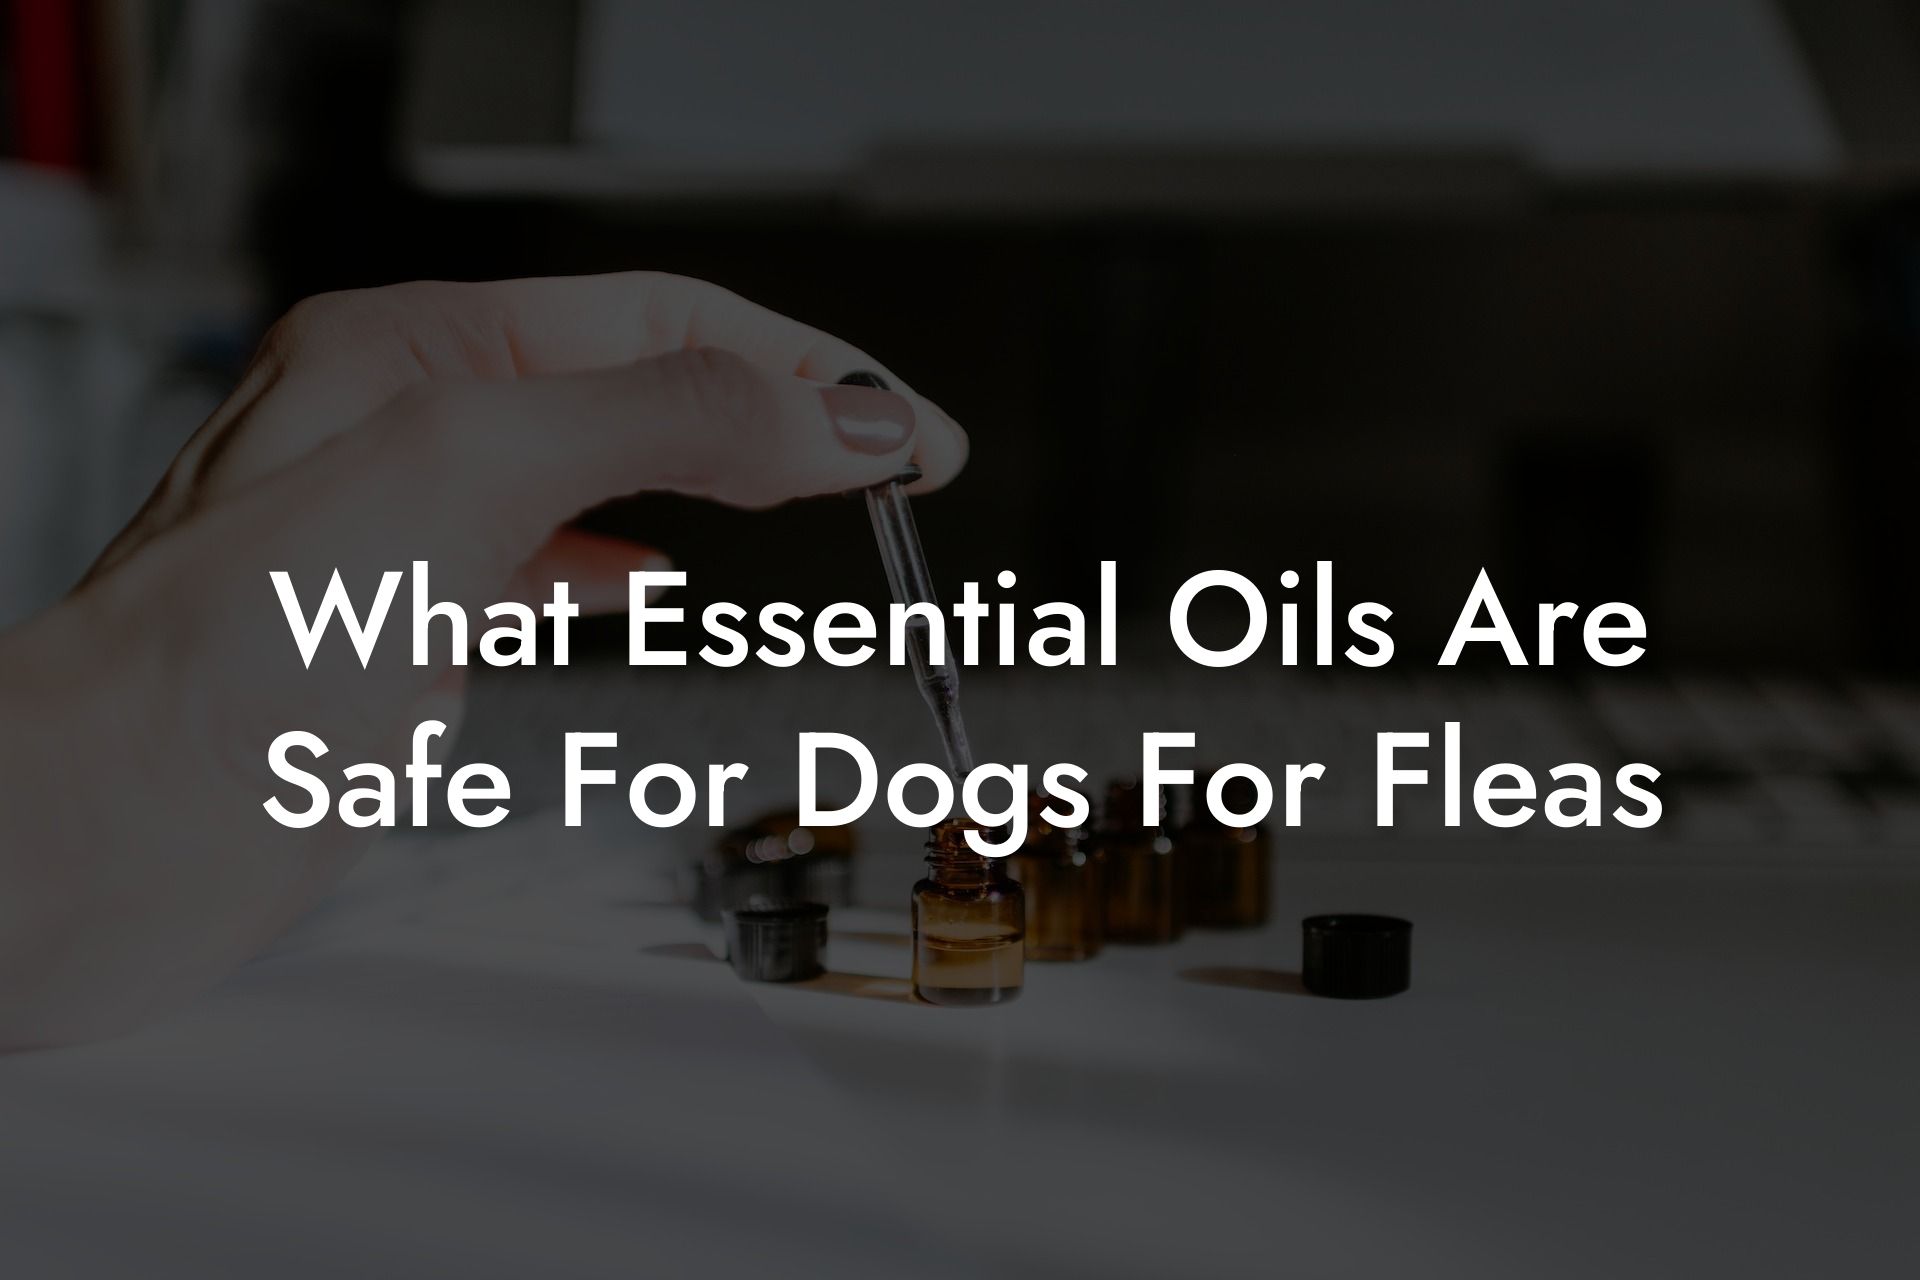 What Essential Oils Are Safe For Dogs For Fleas